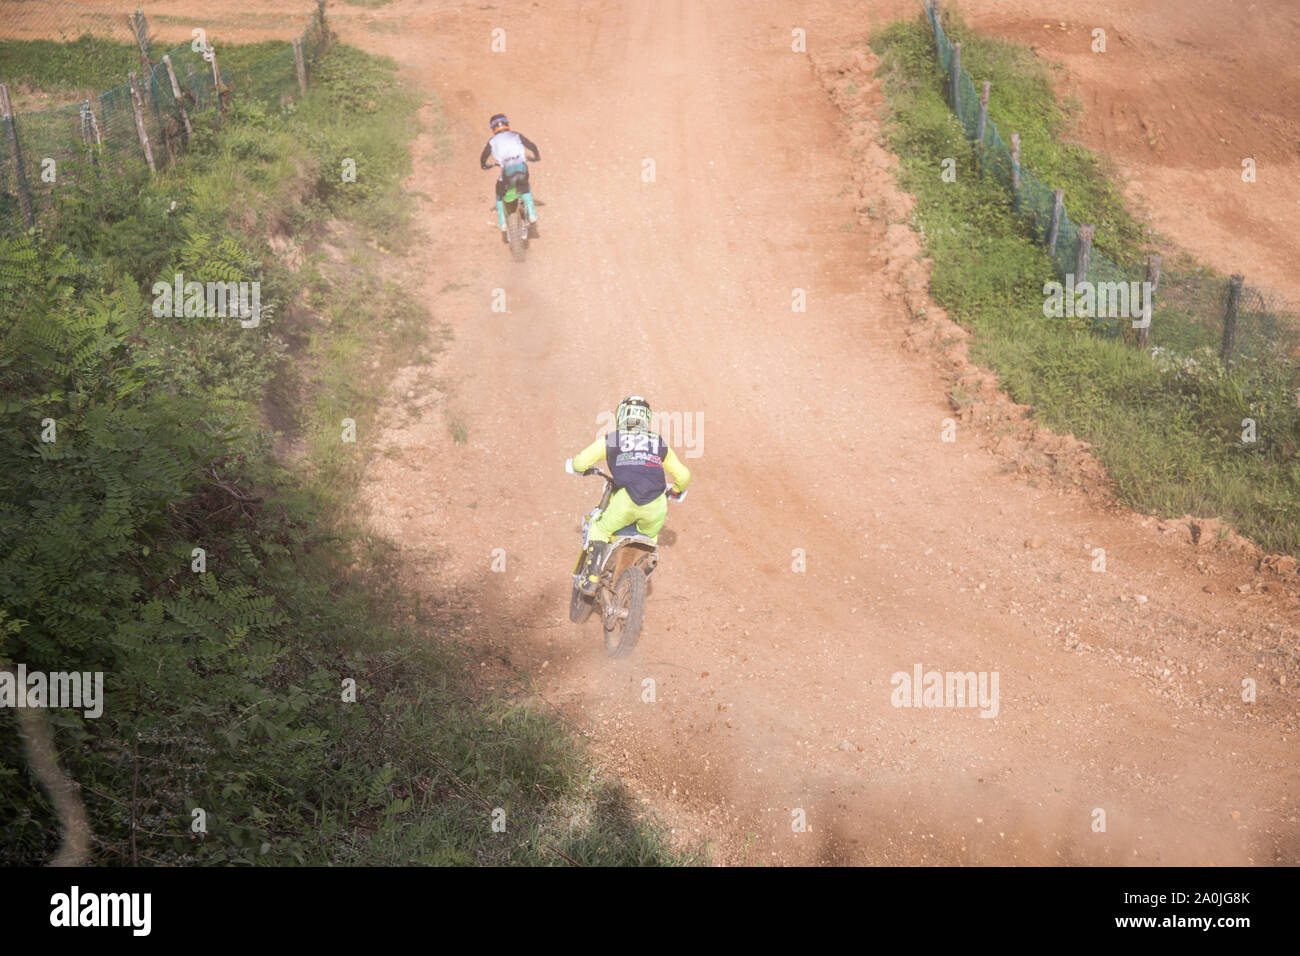 Giavera del Montello, Italy. 14 September 2019. Motorcyclists racing on a motocross track. Credit: Lukasz Obermann/Alamy Live News Stock Photo